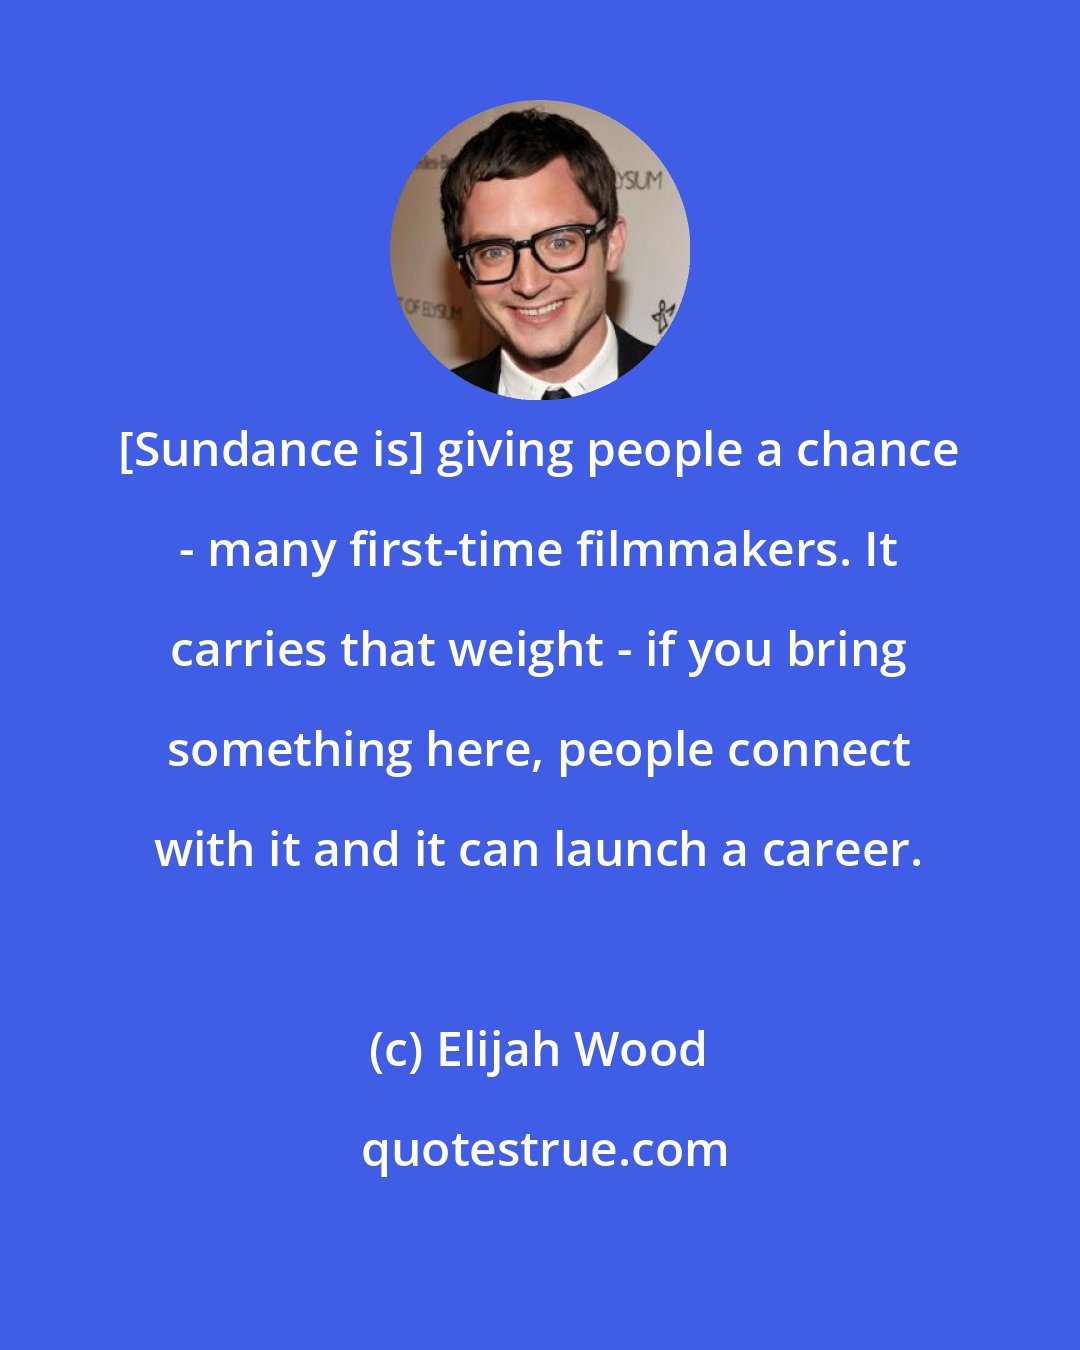 Elijah Wood: [Sundance is] giving people a chance - many first-time filmmakers. It carries that weight - if you bring something here, people connect with it and it can launch a career.